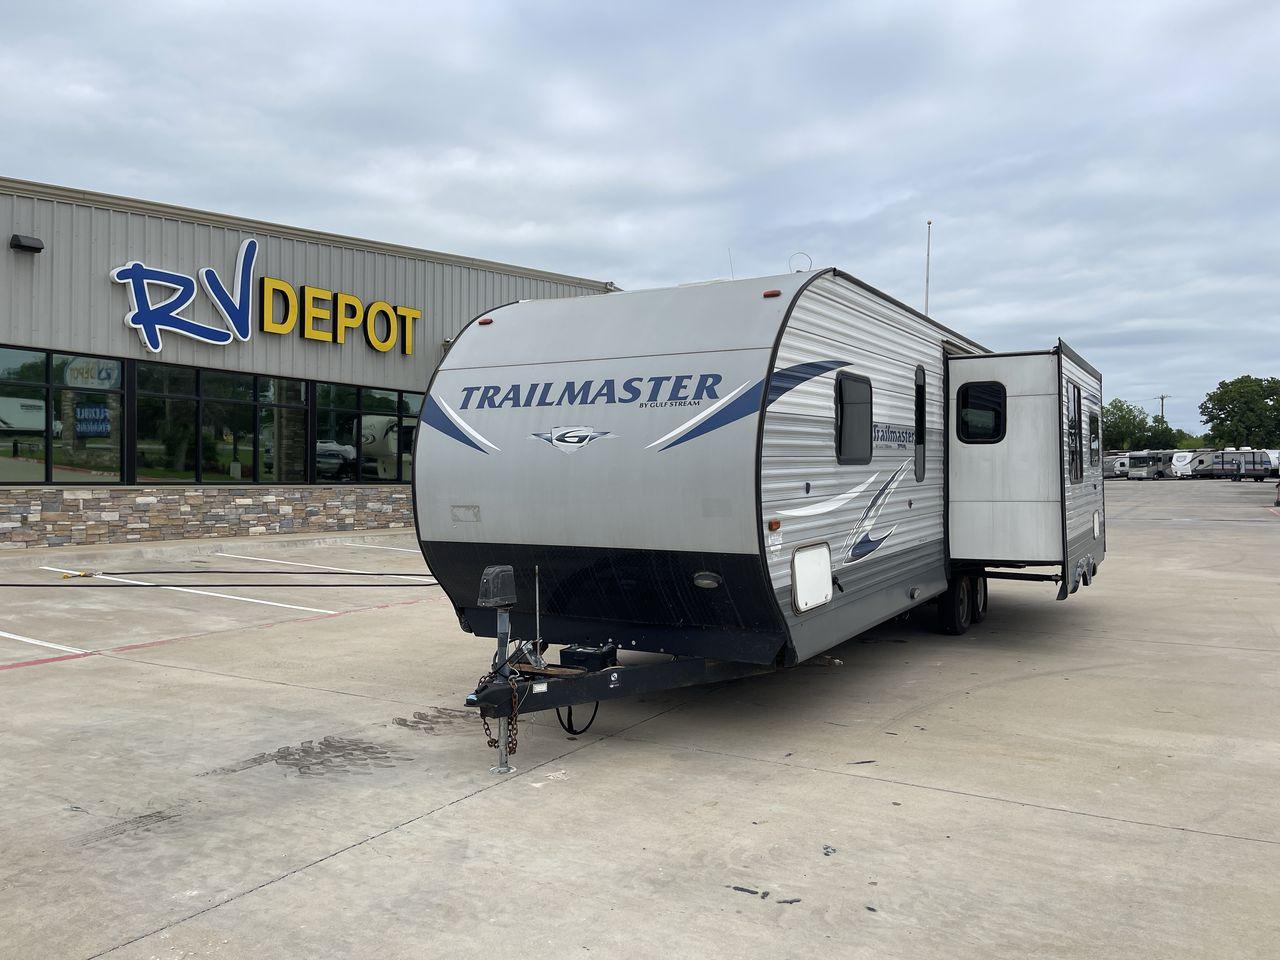 2018 GULFSTREAM TRAILMASTER 262RLS (1NL1GTP2XJ1) , Length: 31.25 ft. | Dry Weight: 6,849 lbs. | Slides: 1 transmission, located at 4319 N Main St, Cleburne, TX, 76033, (817) 678-5133, 32.385960, -97.391212 - This 2018 Gulf Stream Trailmaster 262RLS travel trailer measures just over 31' in length. It is a dual axle, steel wheel setup with a dry weight of 6,849 lbs and a carrying capacity of 1,421 lbs. With a dry weight of 6,849 lbs., the Trailmaster 262RLS offers easy maneuverability without compromising - Photo #0